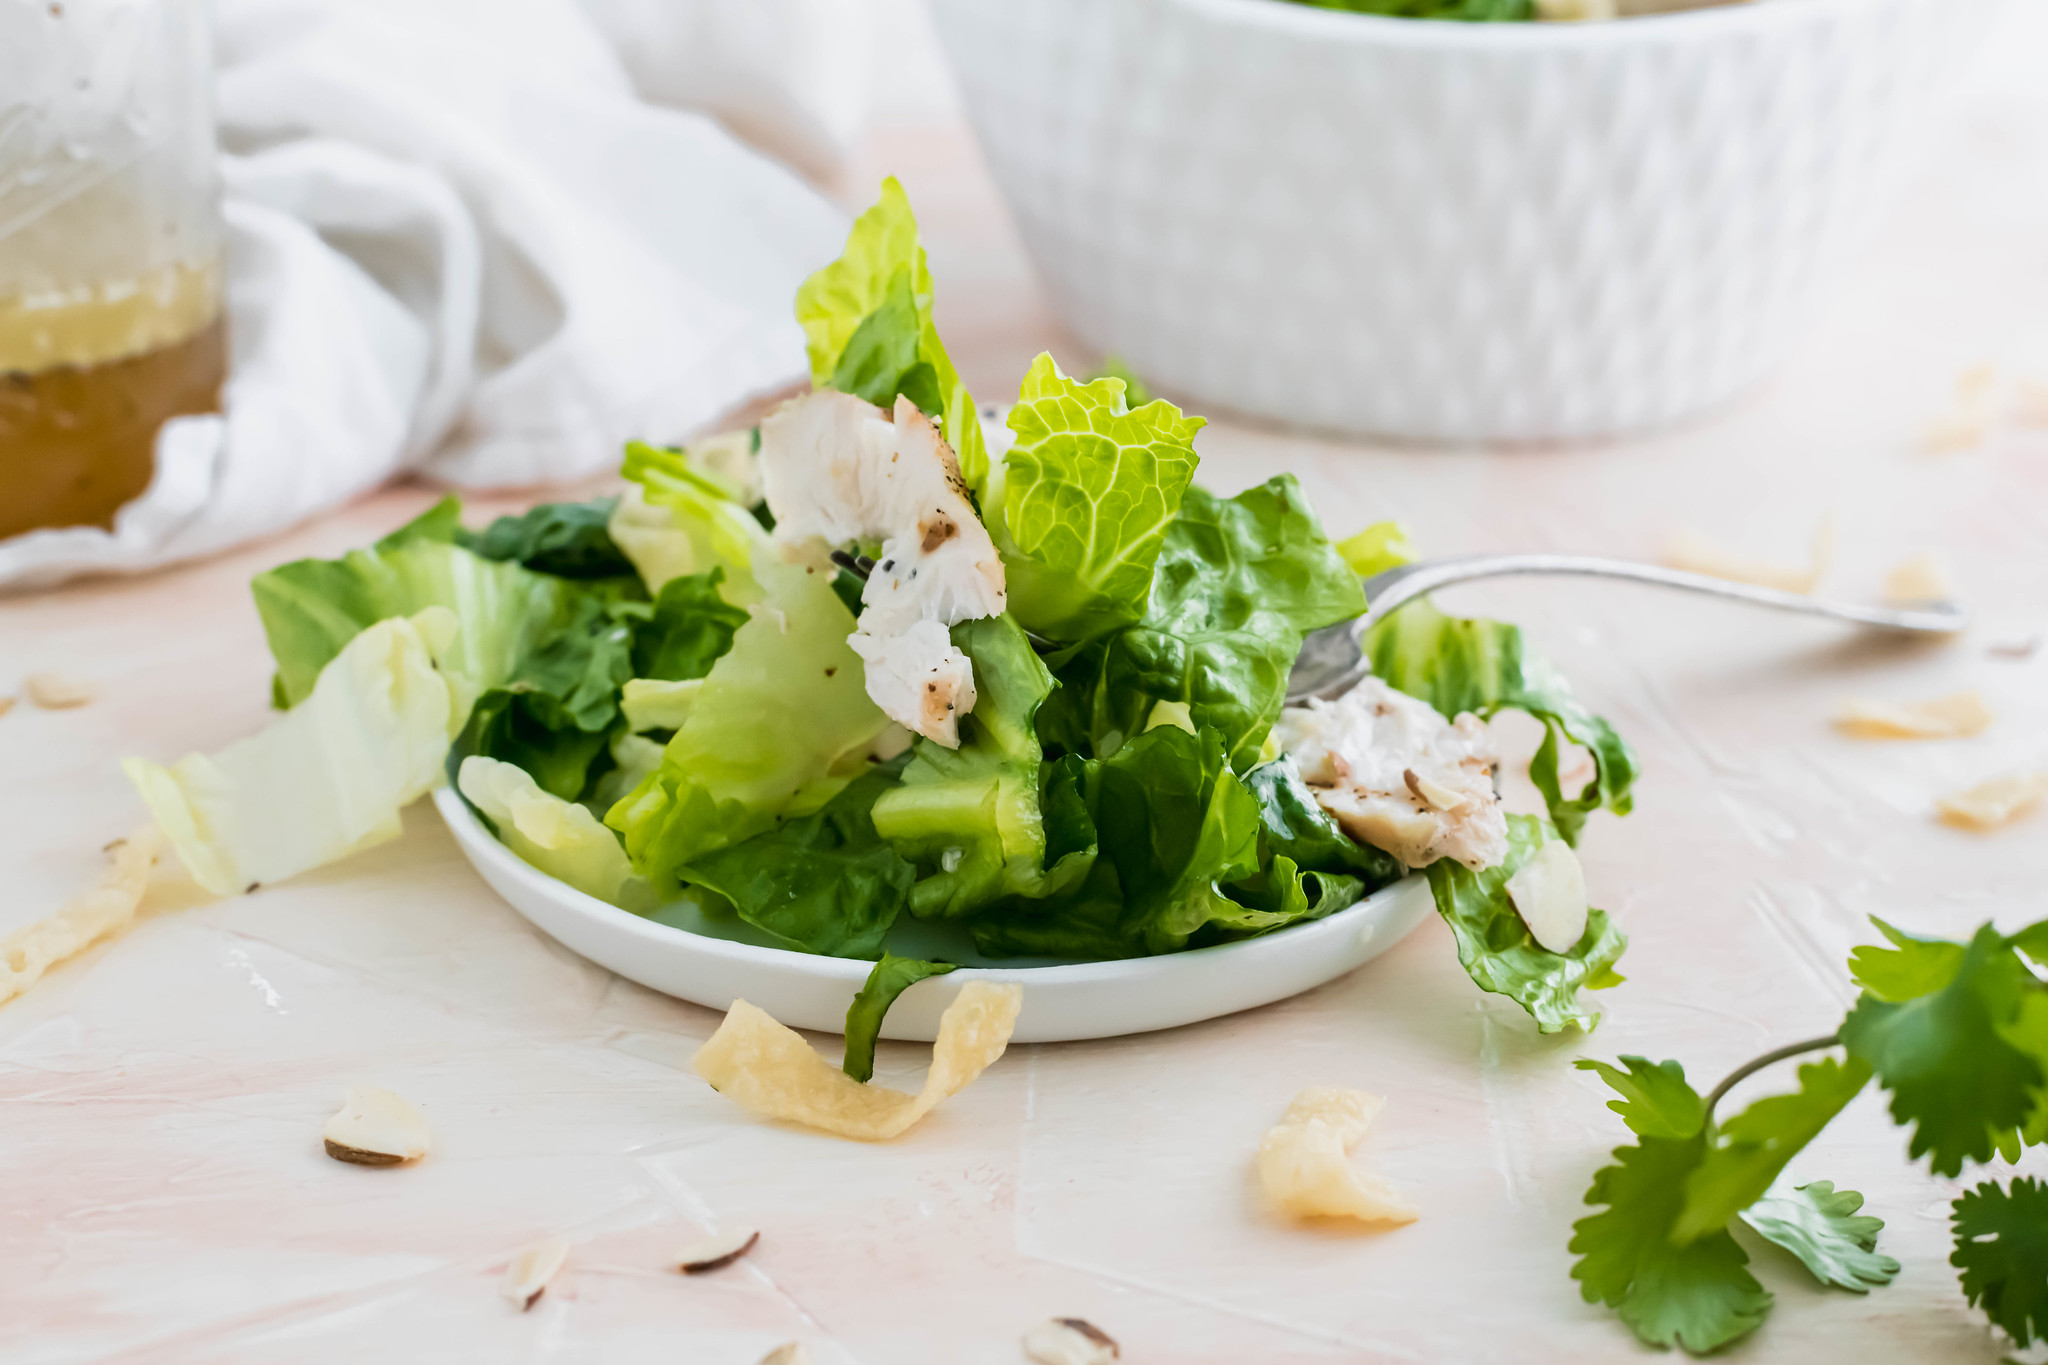 Make your favorite salad at home with this recipe for Panera's Asian Sesame Chicken Salad. It tastes JUST like the restaurant version at a fraction of the cost.